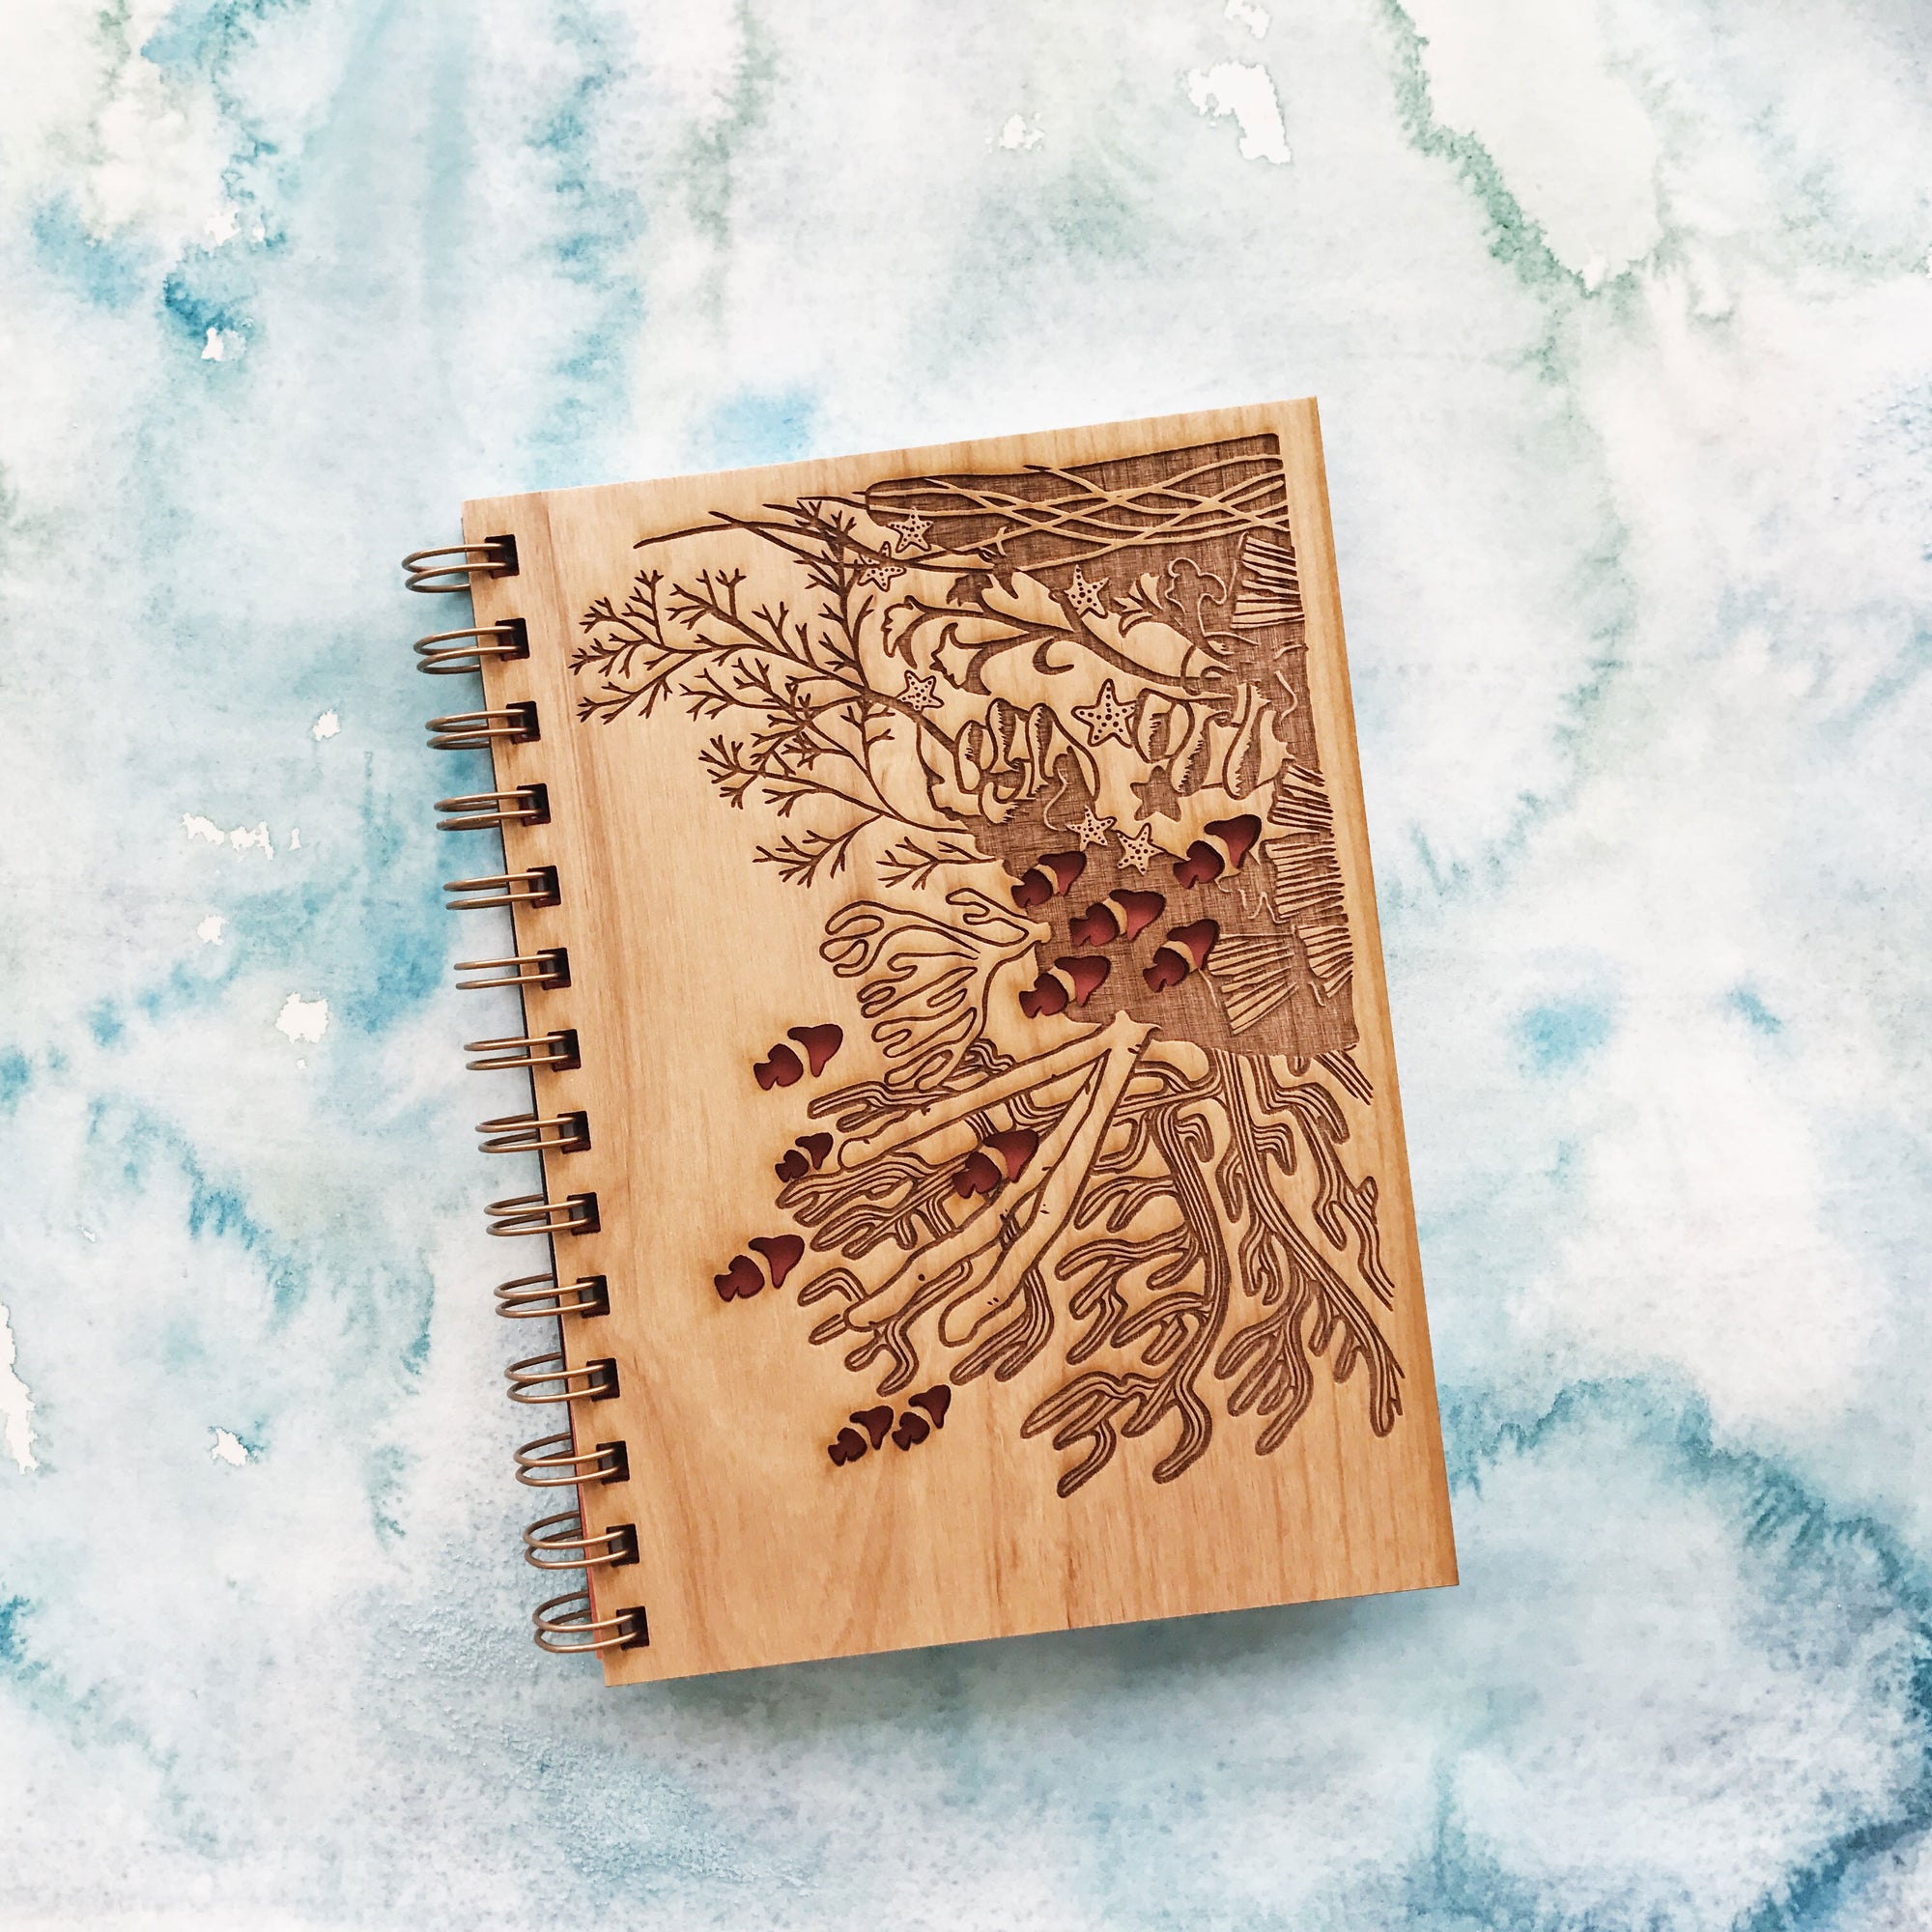 Hereafter Wood Journal